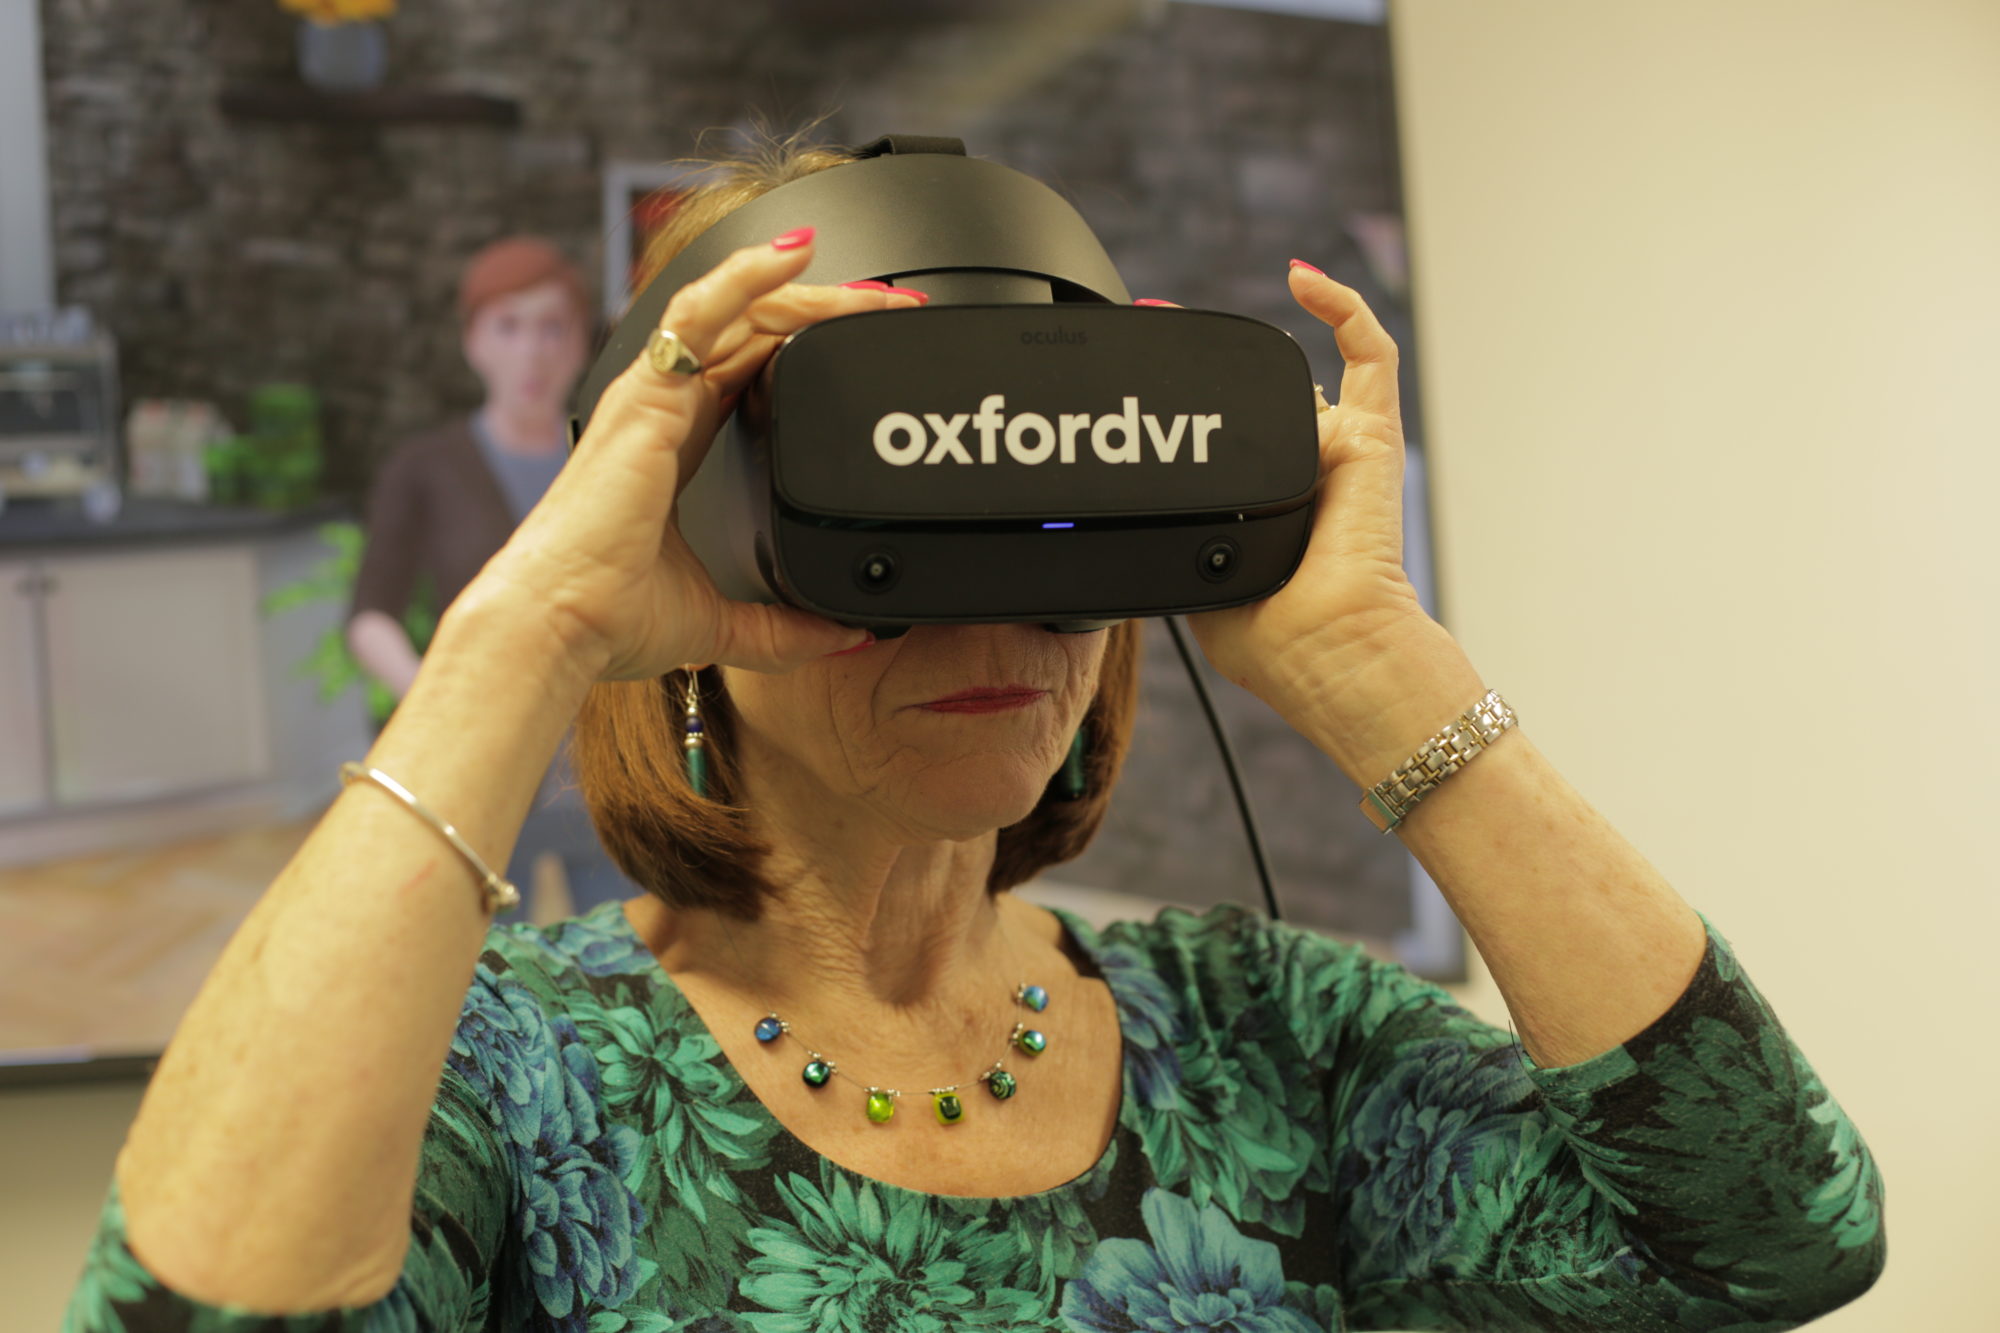 News-medical: Virtual reality psychological therapy shown to work well for patients with mental health problems